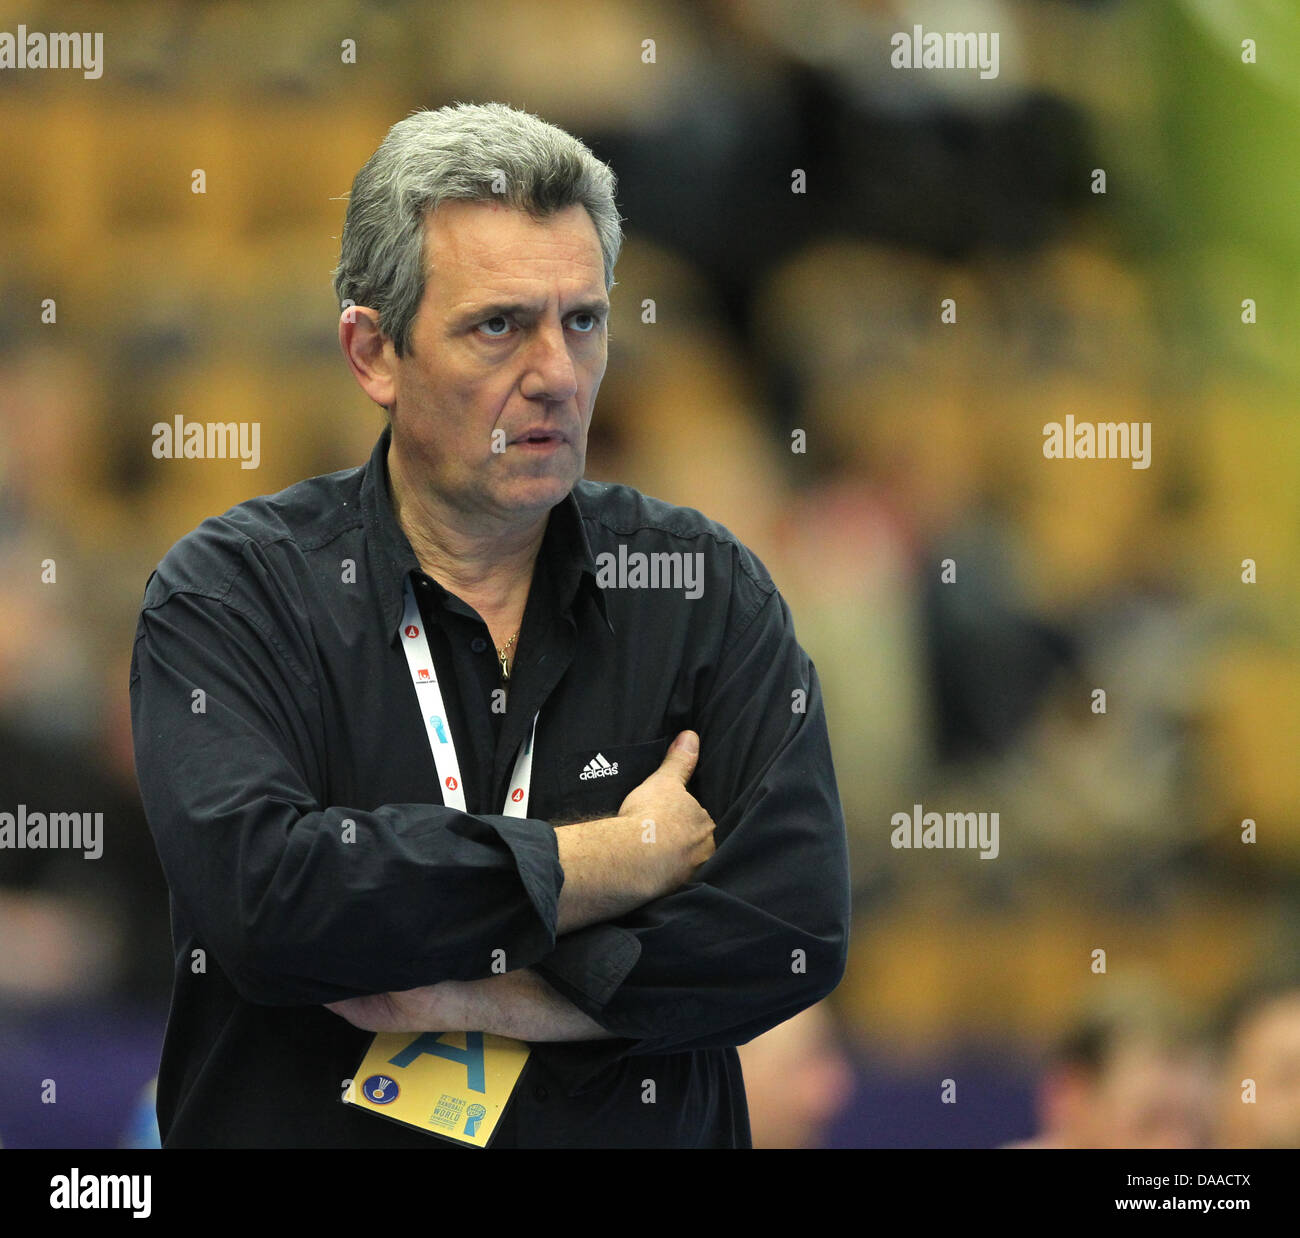 French headcoach Claude Onesta is seen during the Men's Handball World Championship main round group 1 match France against Iceland in Jönköping, Sweden, 25 January 2011. Photo: Jens Wolf dpa Stock Photo